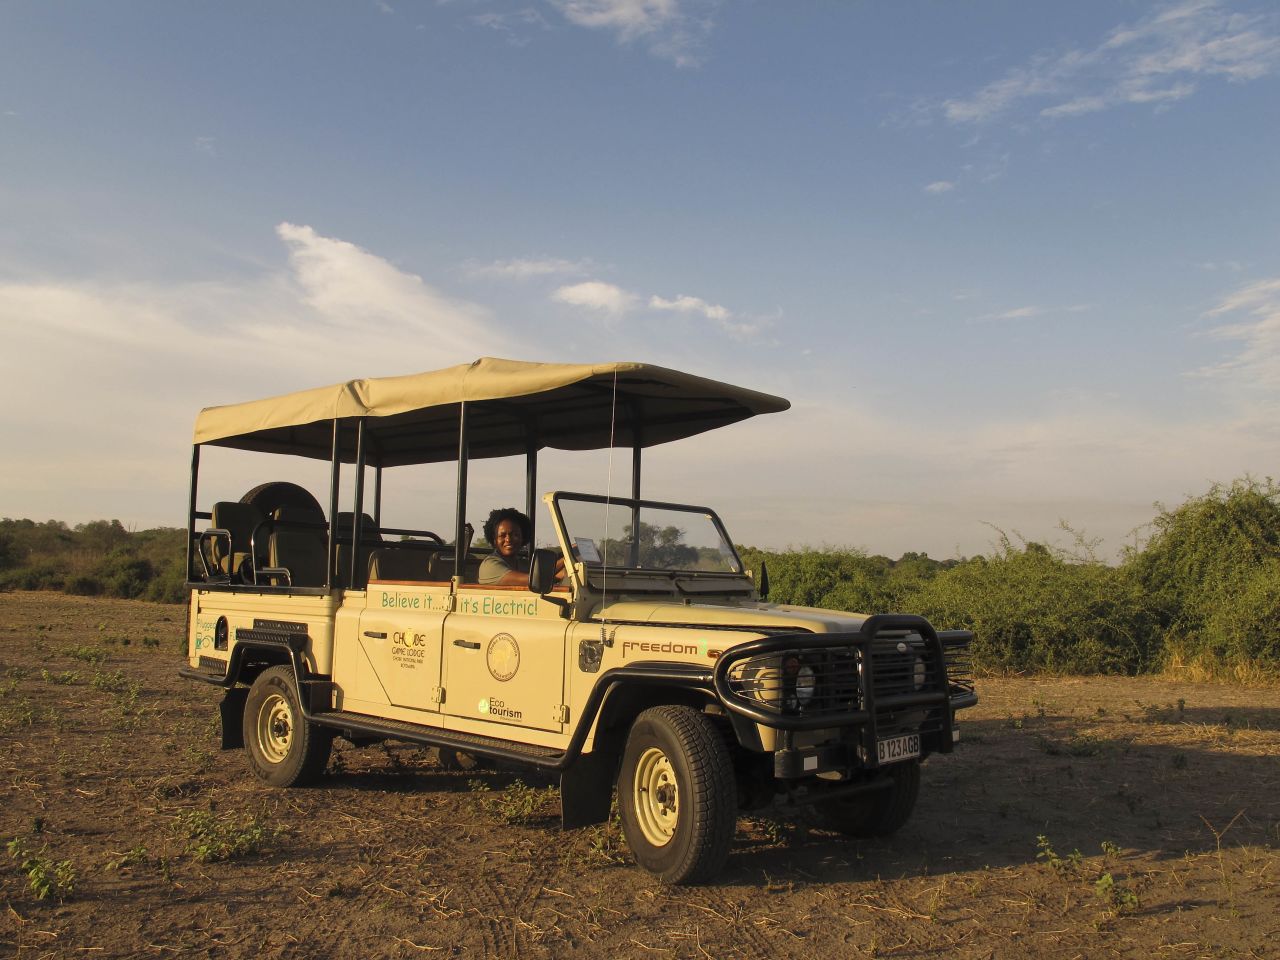 Guide Lebo behind the wheel of Chobe Game Lodge's first electric game viewing vehicle.